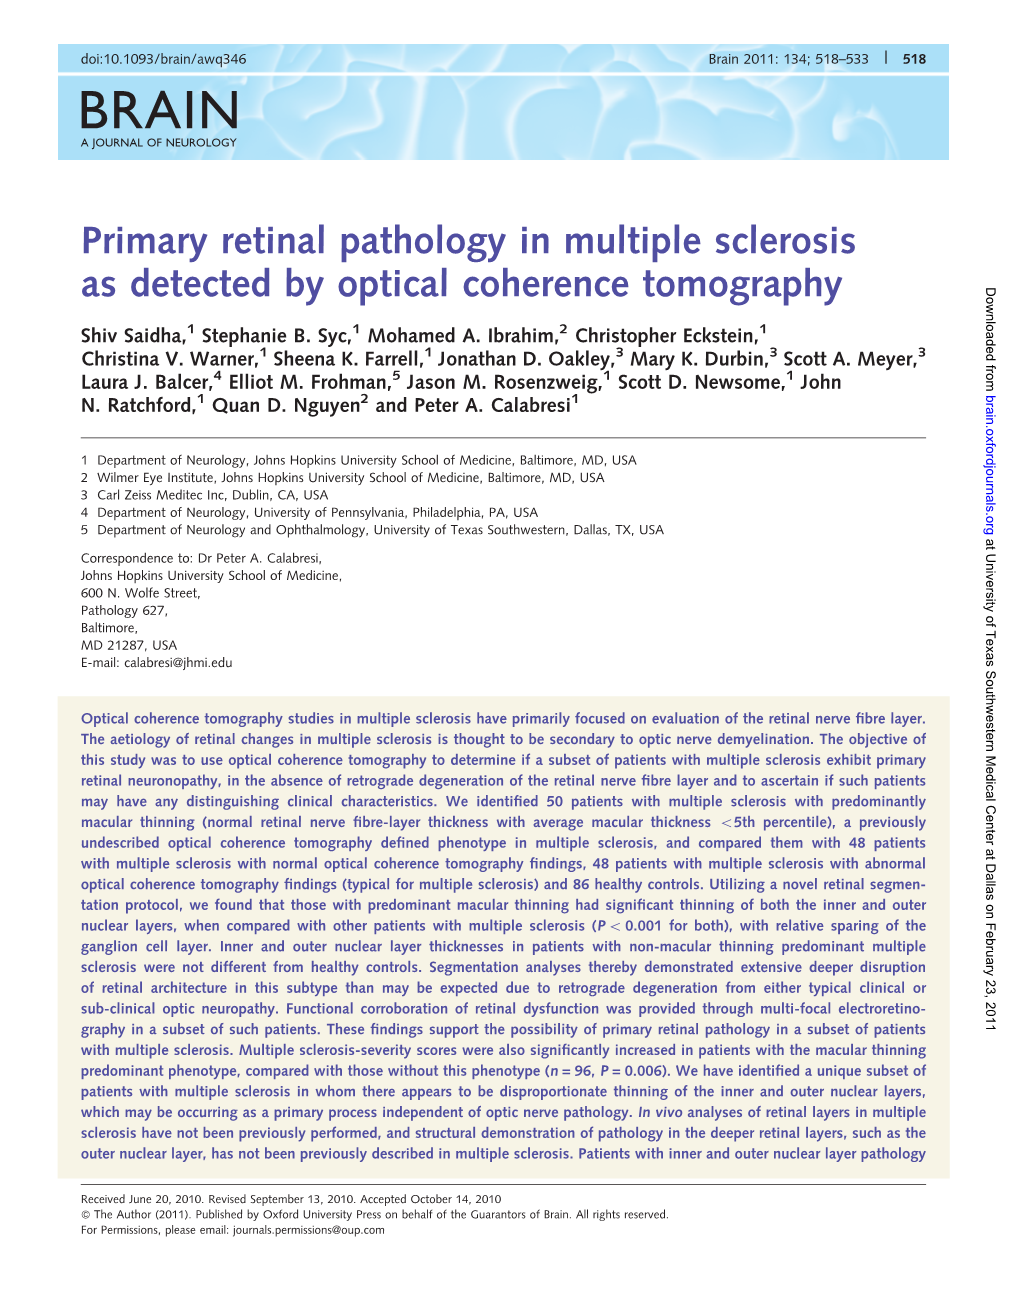 Primary Retinal Pathology in Multiple Sclerosis As Detected by Optical Coherence Tomography Downloaded From